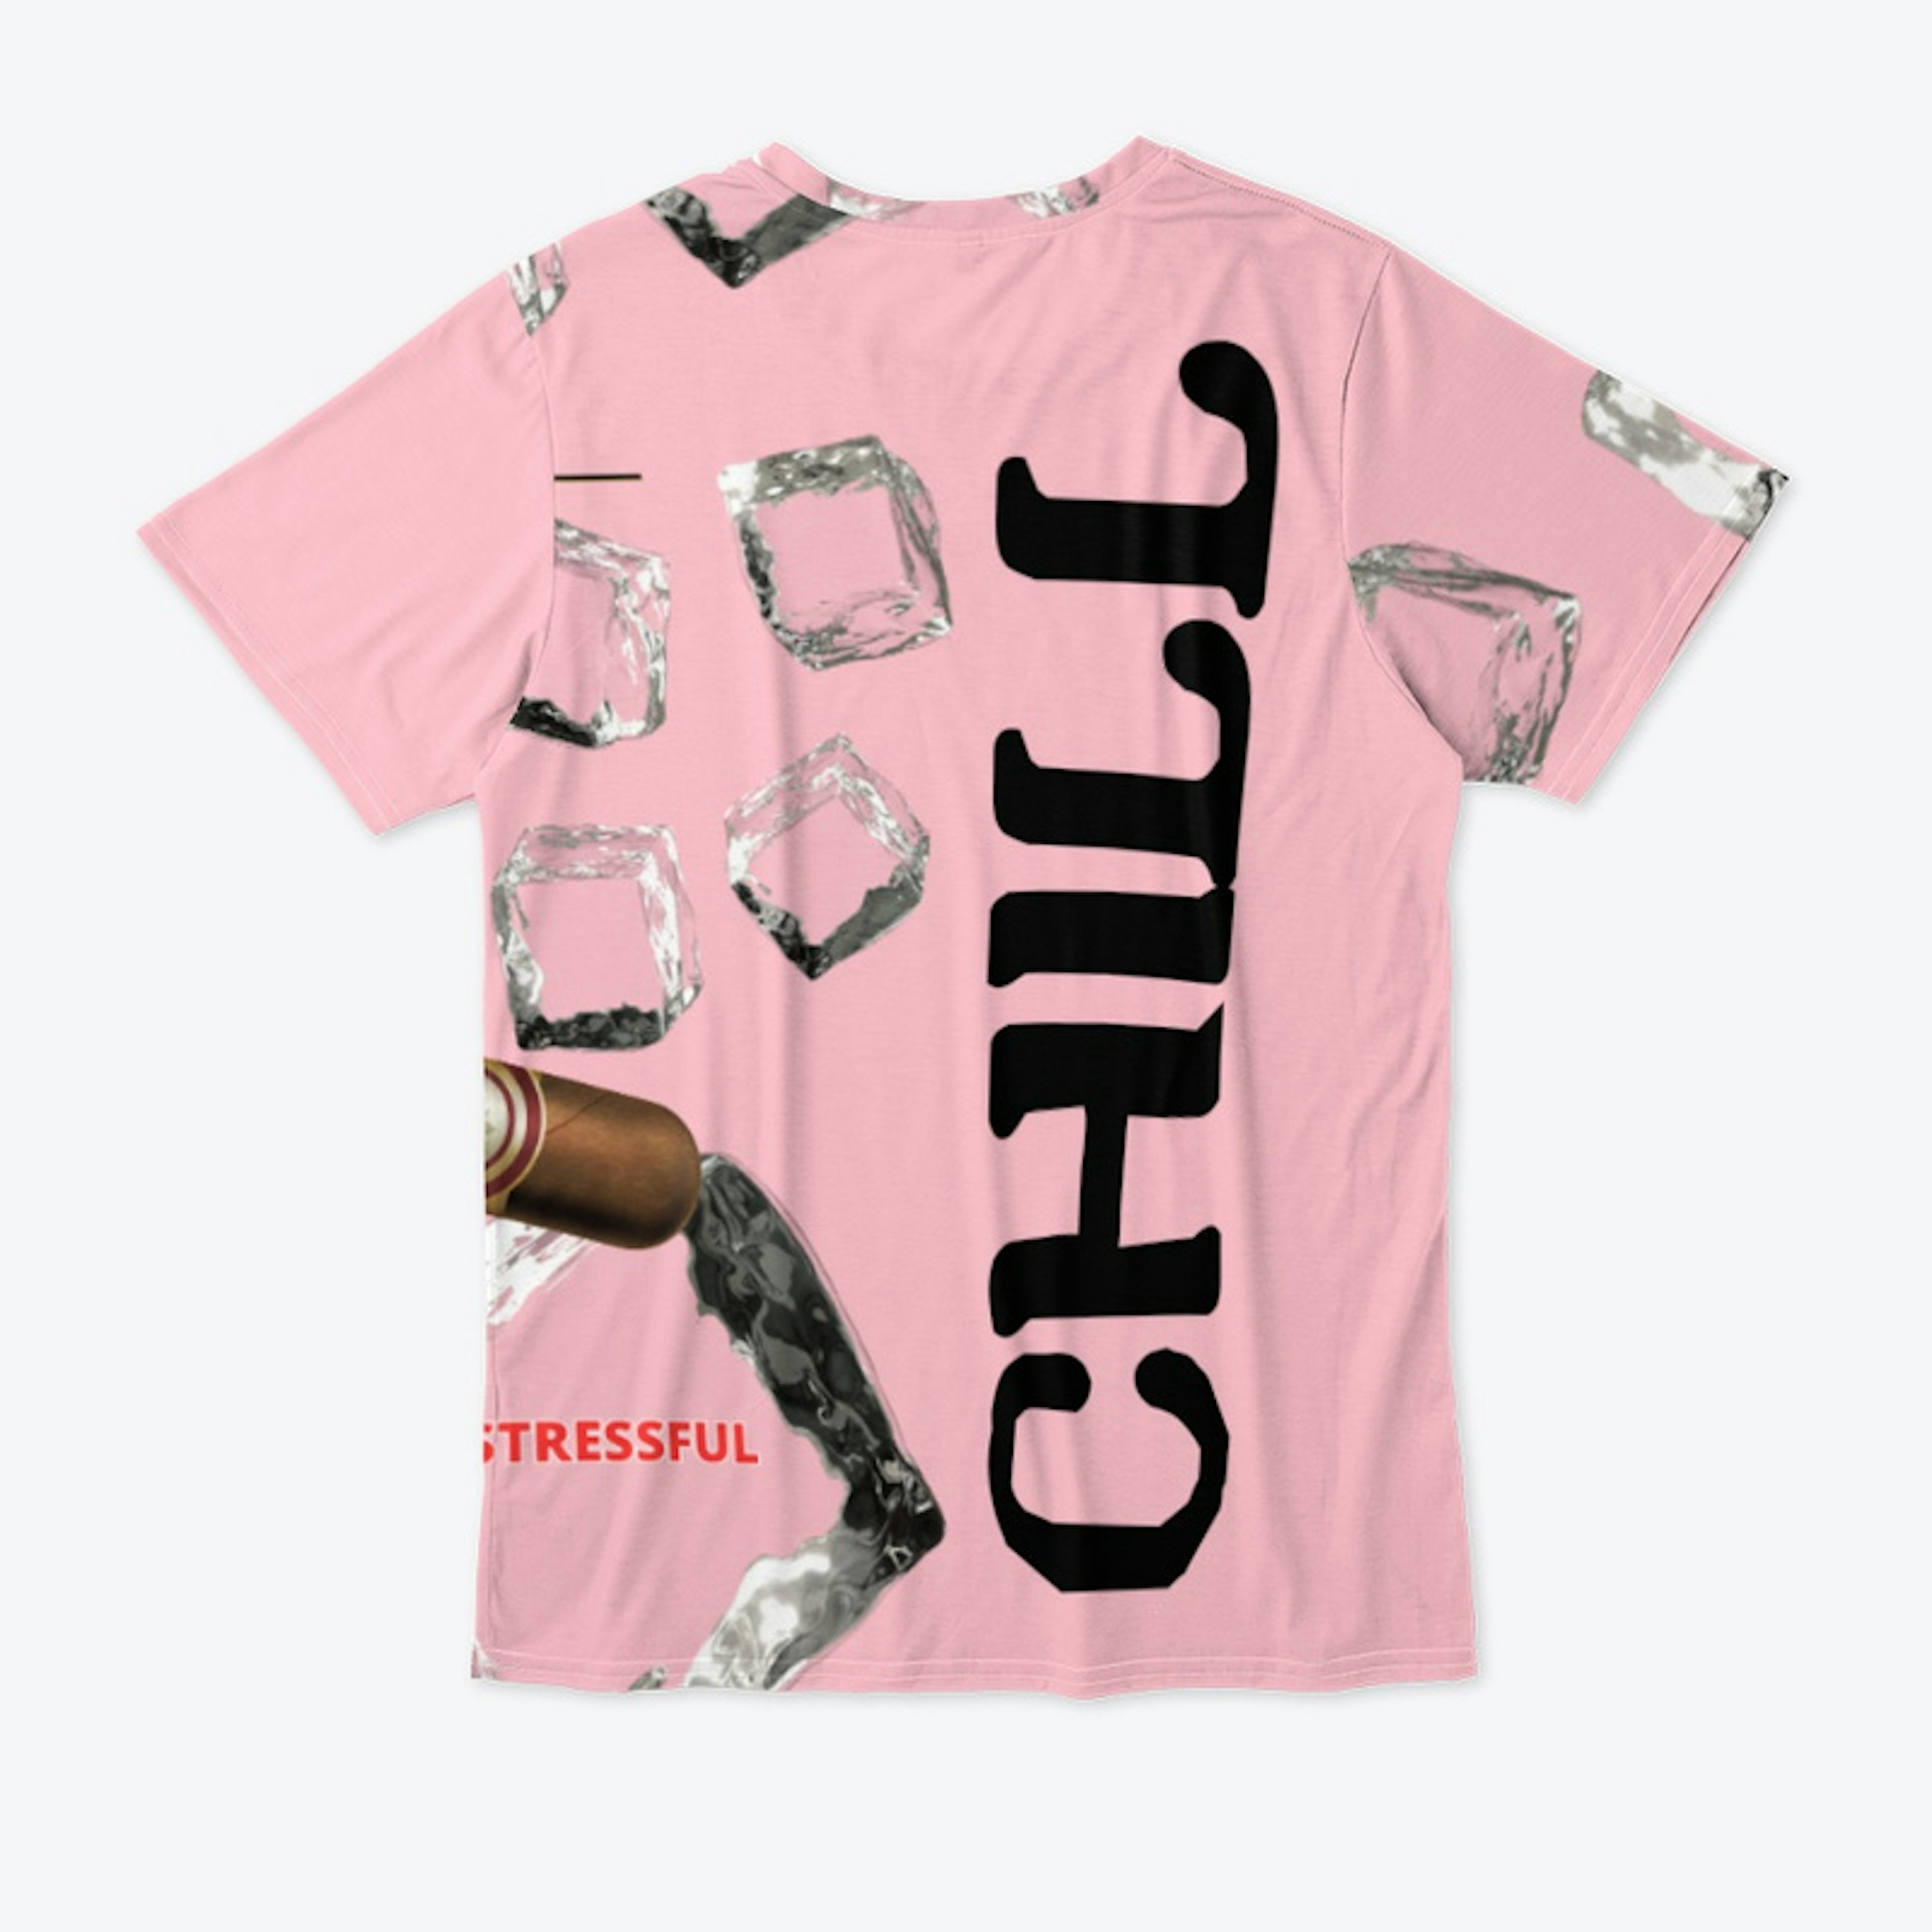 CHILL TEES